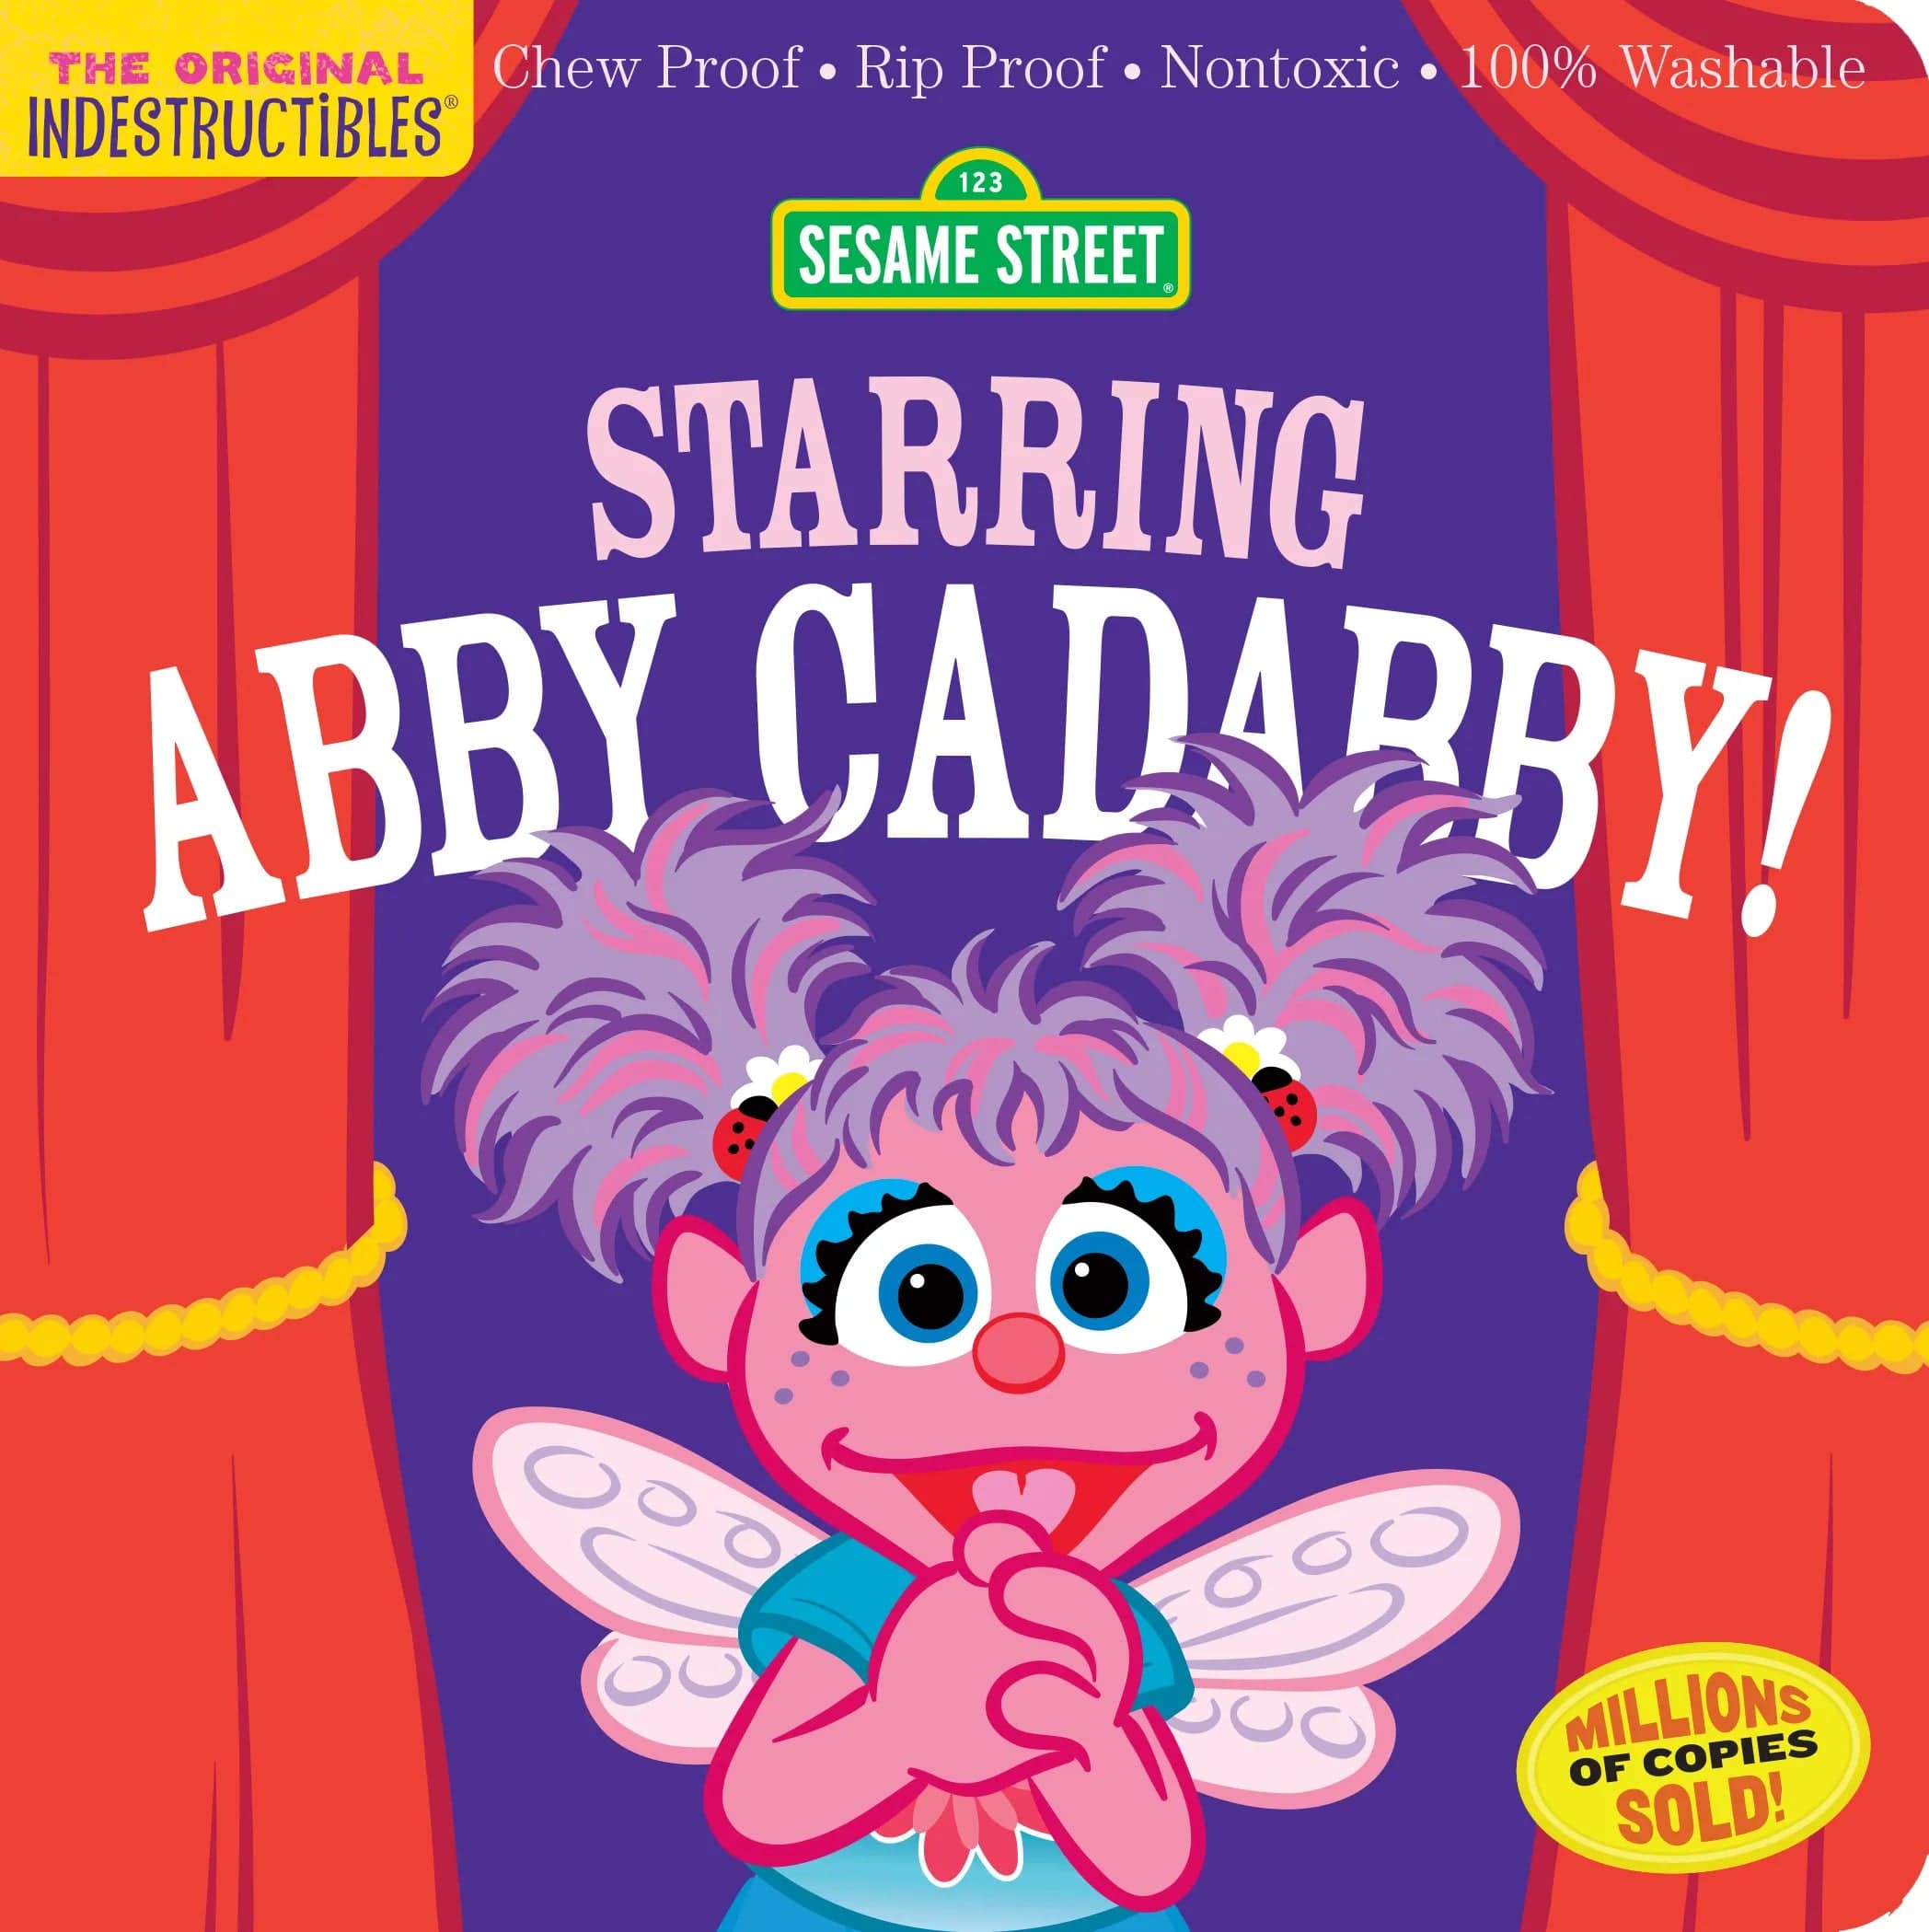 Indestructibles: Sesame Street: Starring Abby Cadabby! Indestructibles Lil Tulips